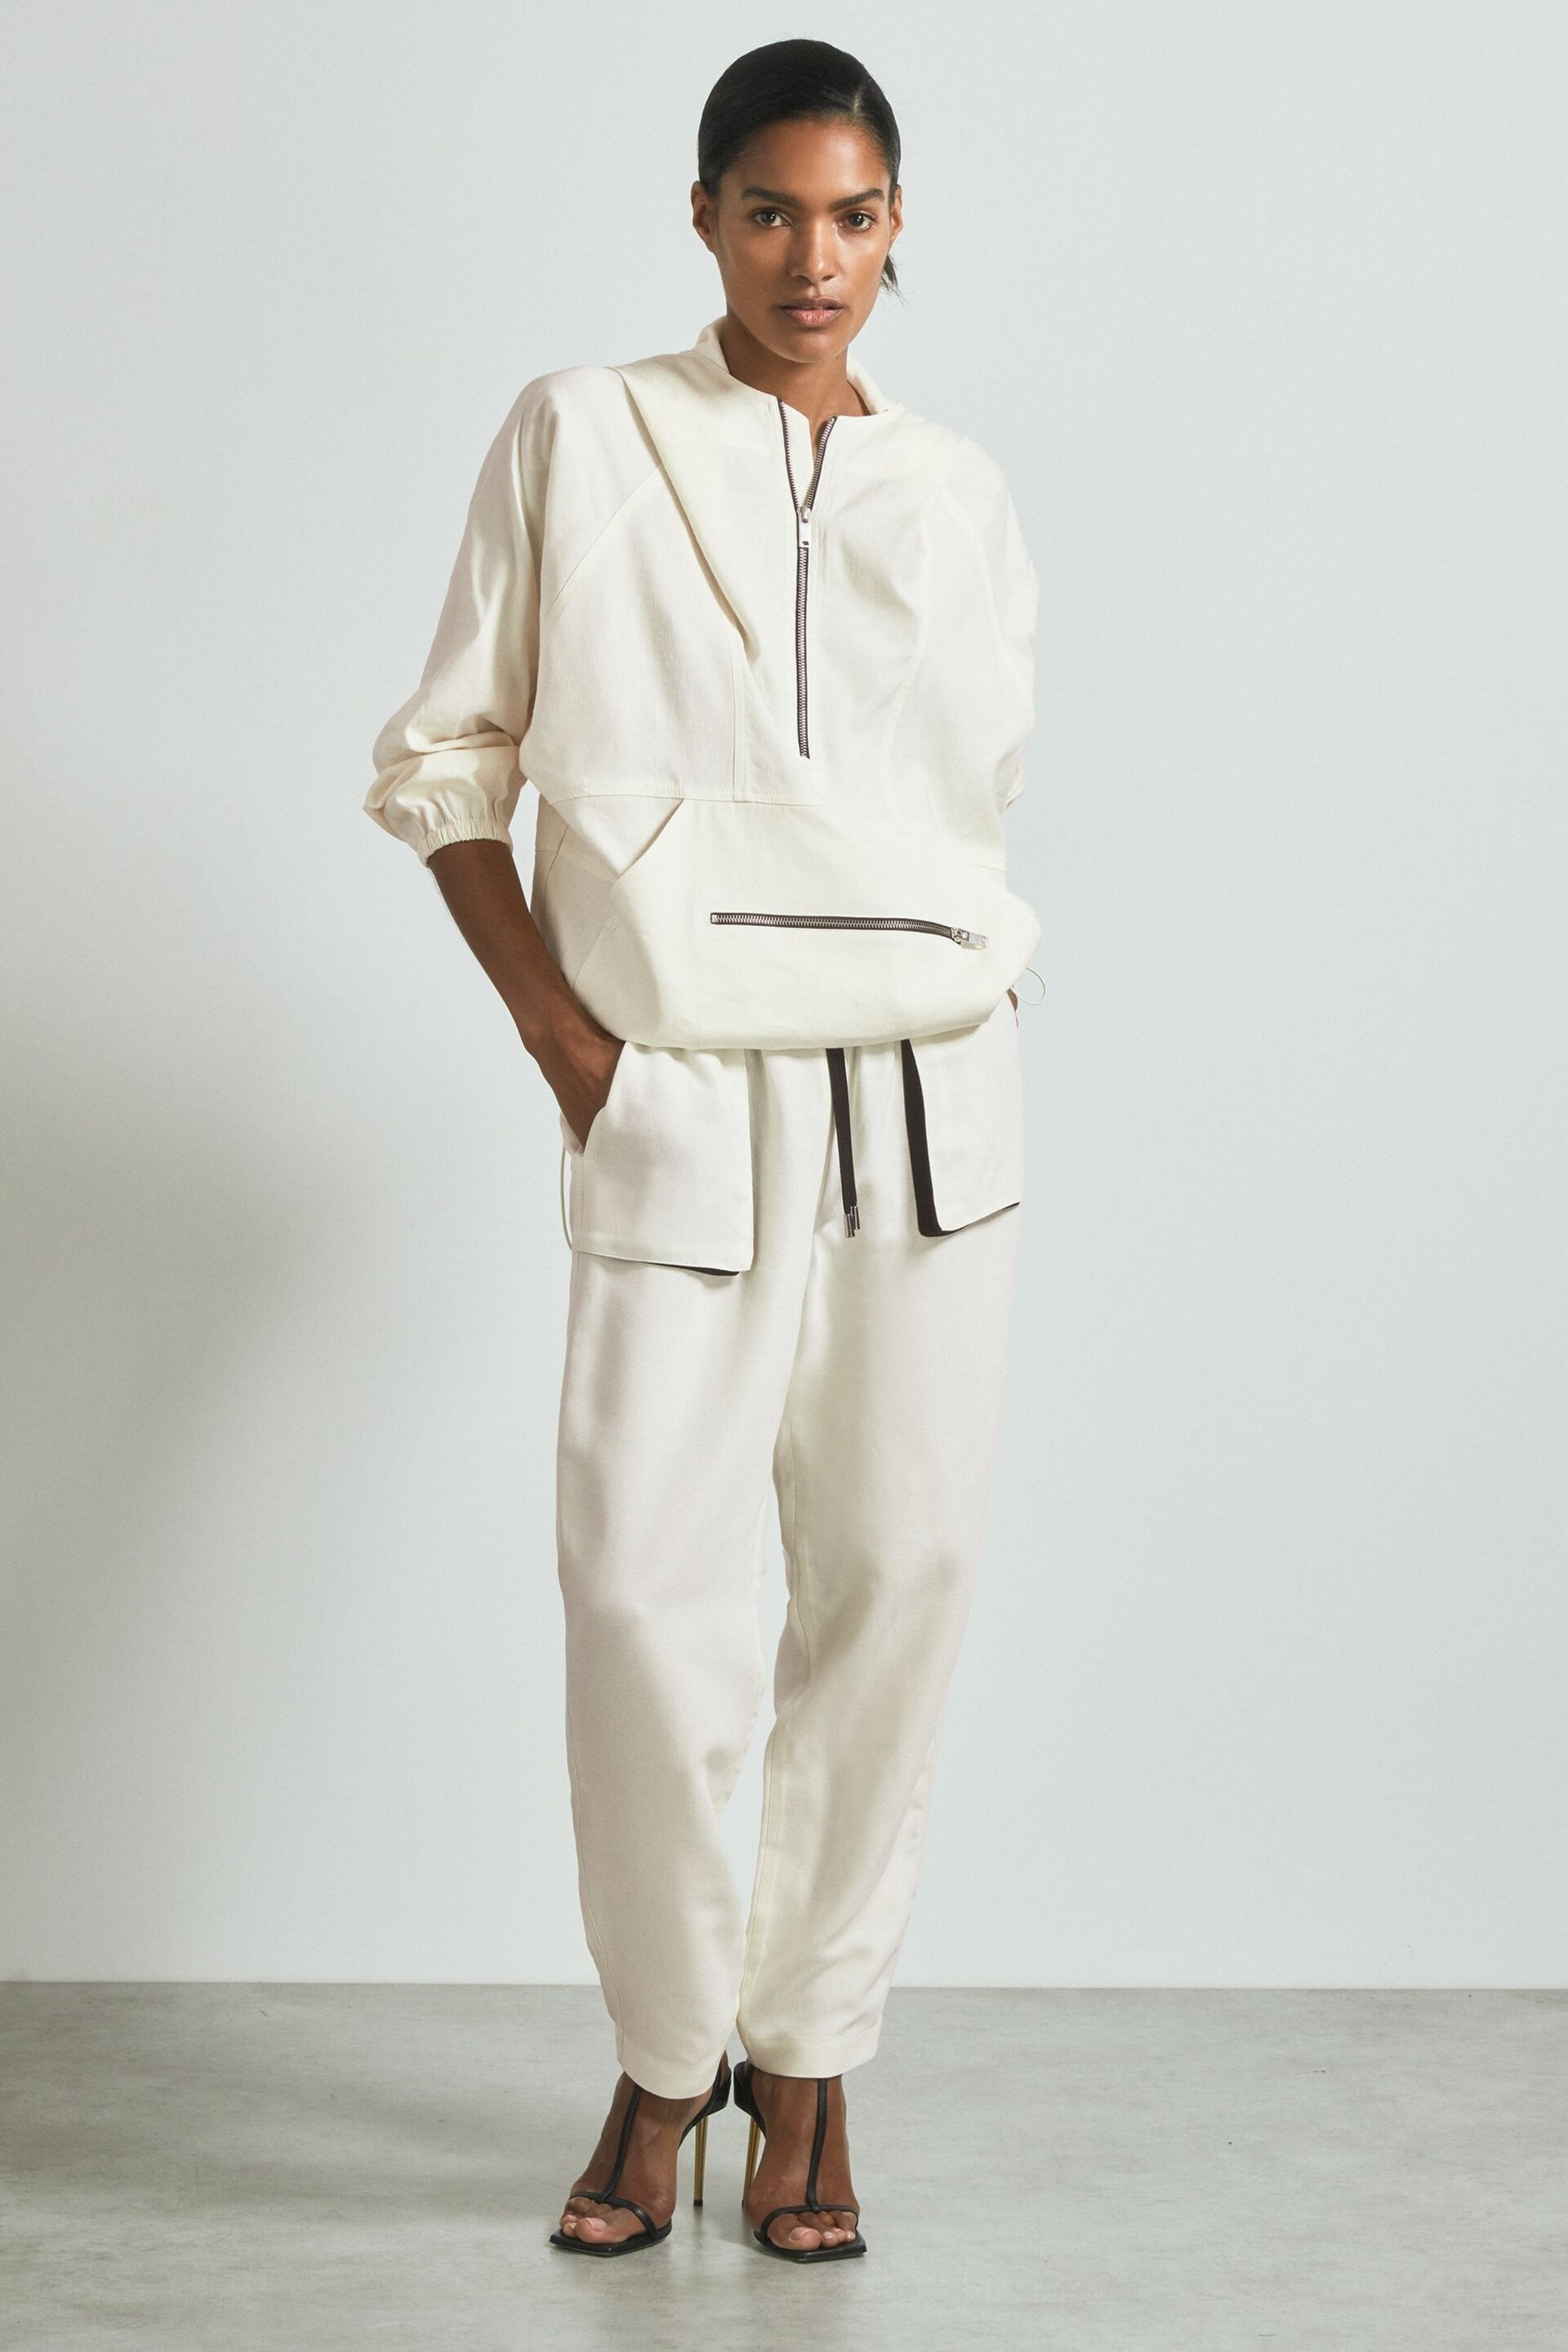 Reiss White Victoria Linen Blend Hooded Sports Jacket - Image 1 of 6